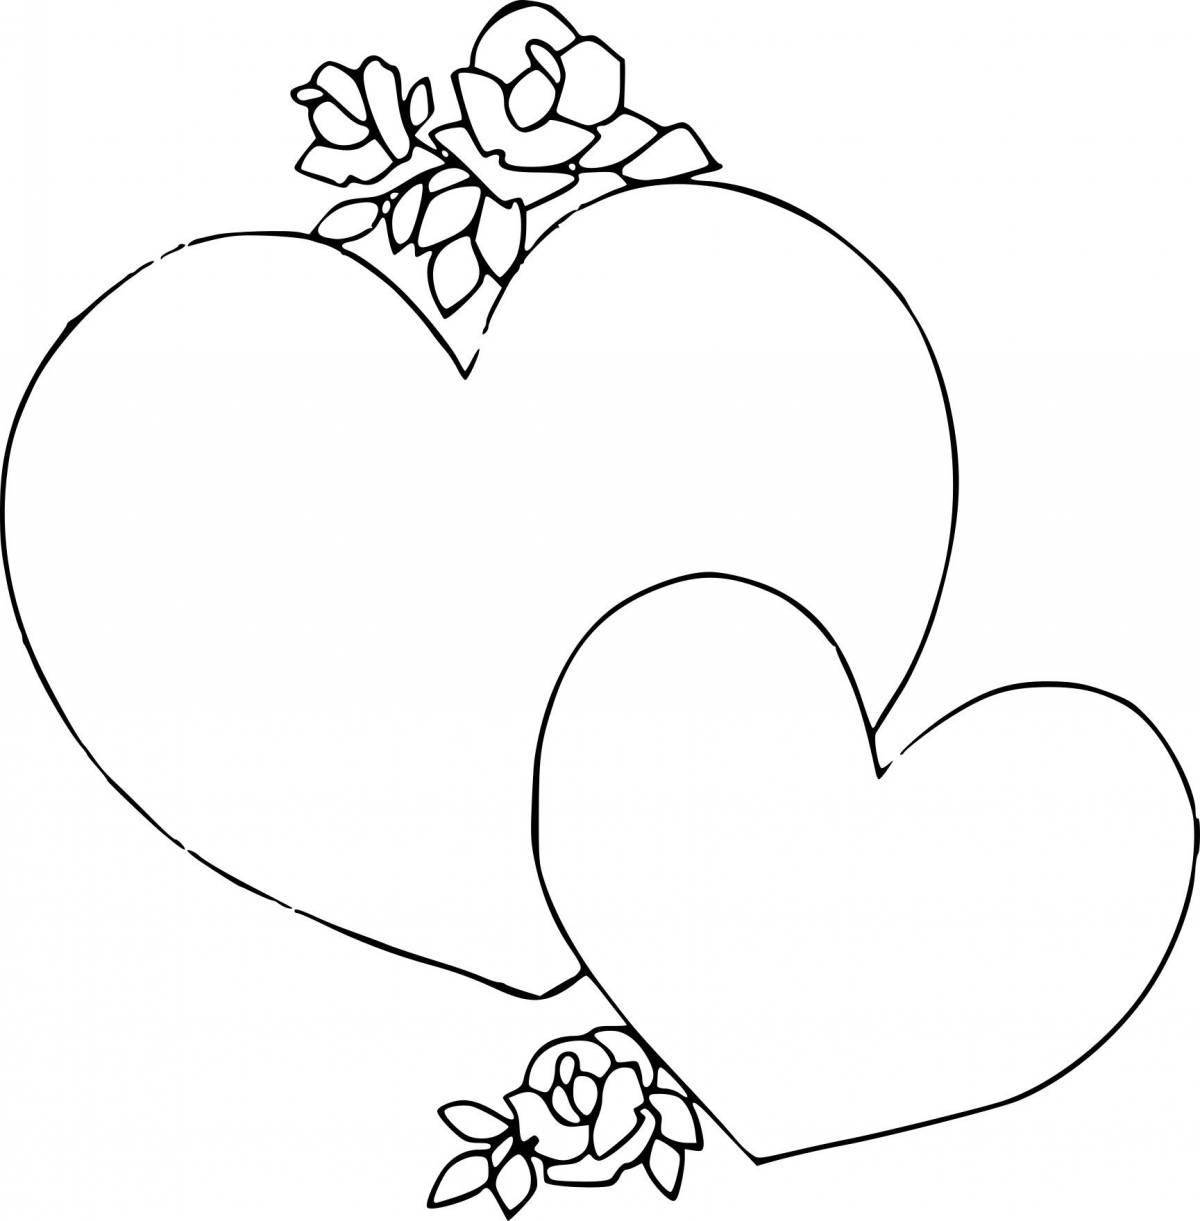 Mother's Glorious Heart Coloring Pages